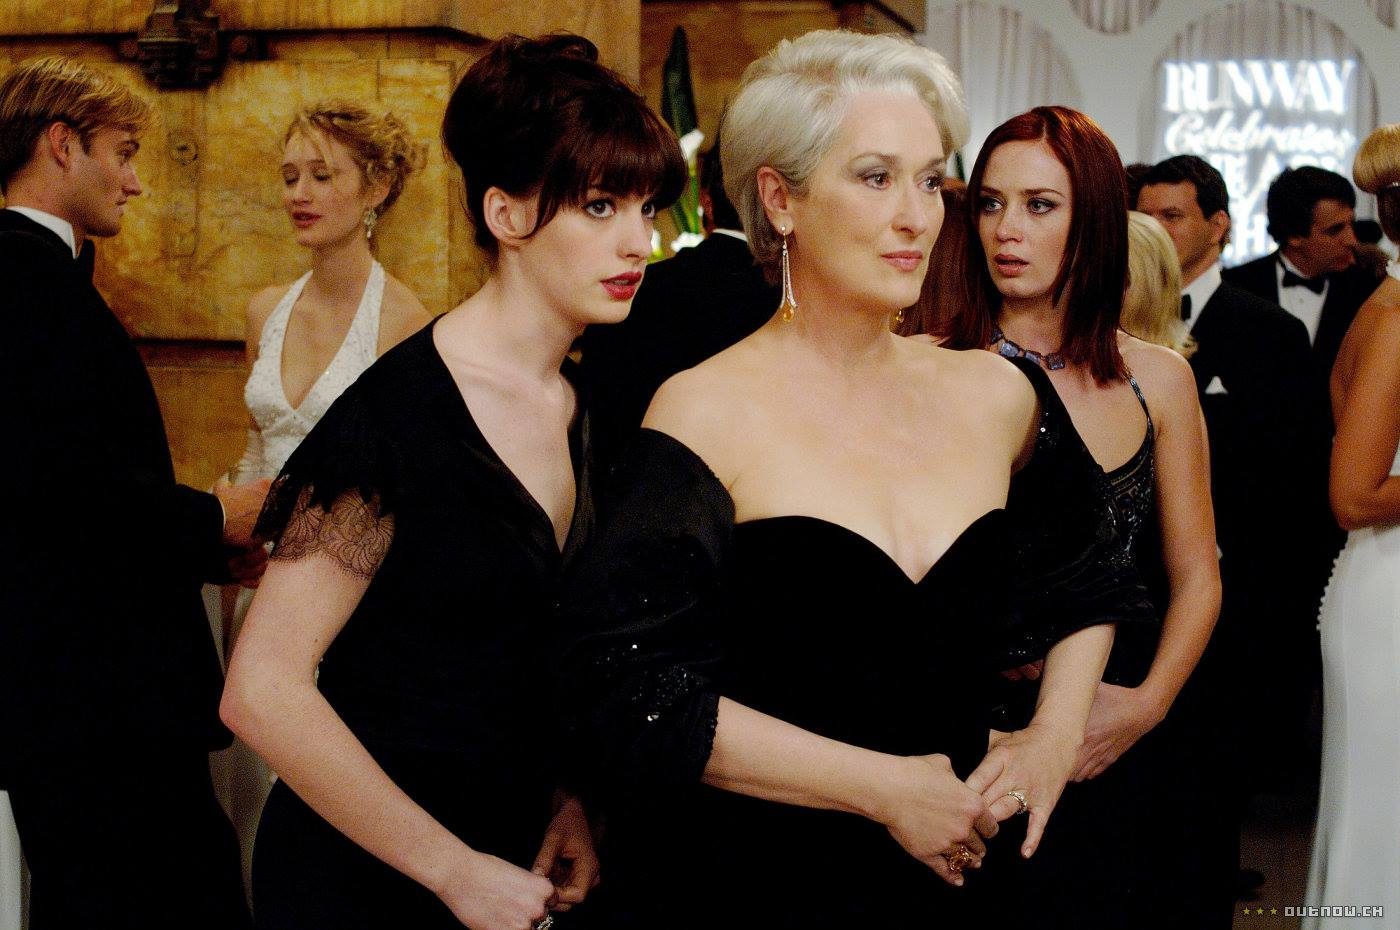 ‘The Devil Wears Prada’ sequel is in the works 